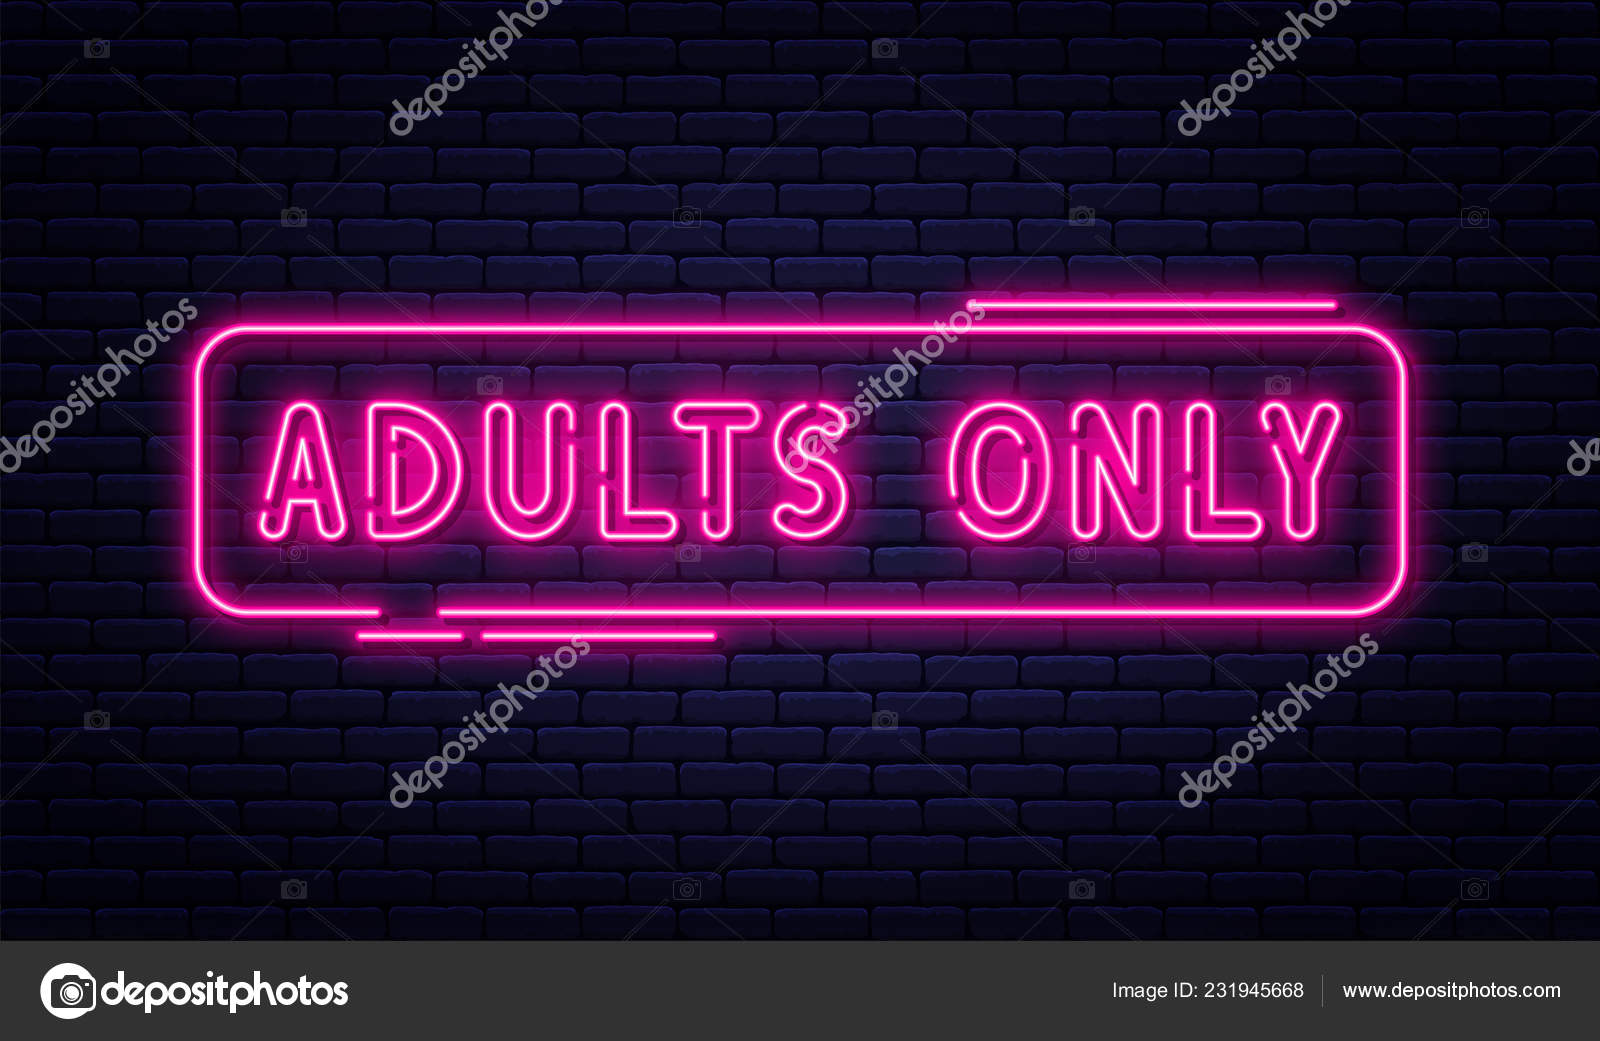 Wwww Xxxxx Sex Video Download Hd Com - Neon Sign Adults Only Sex Xxx Restricted Content Erotic Video Stock Vector  Image by Â©Yevgenij_D #231945668